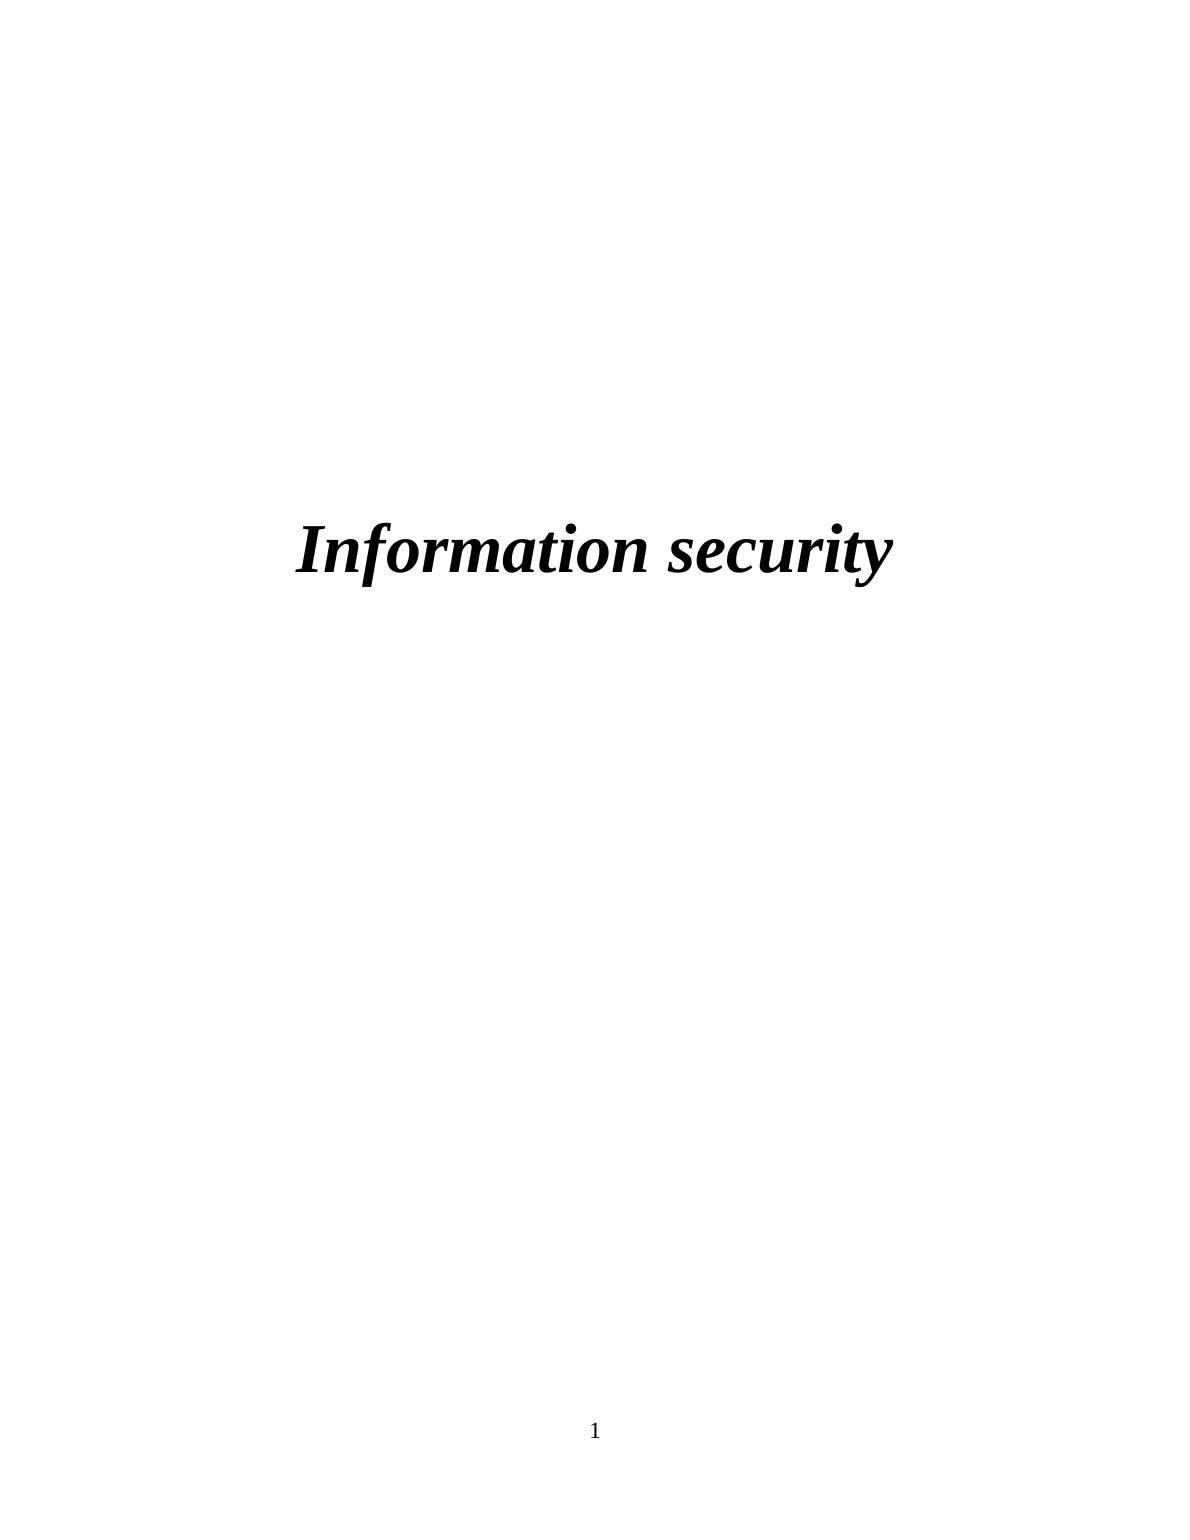 Information Security- Assignment_1